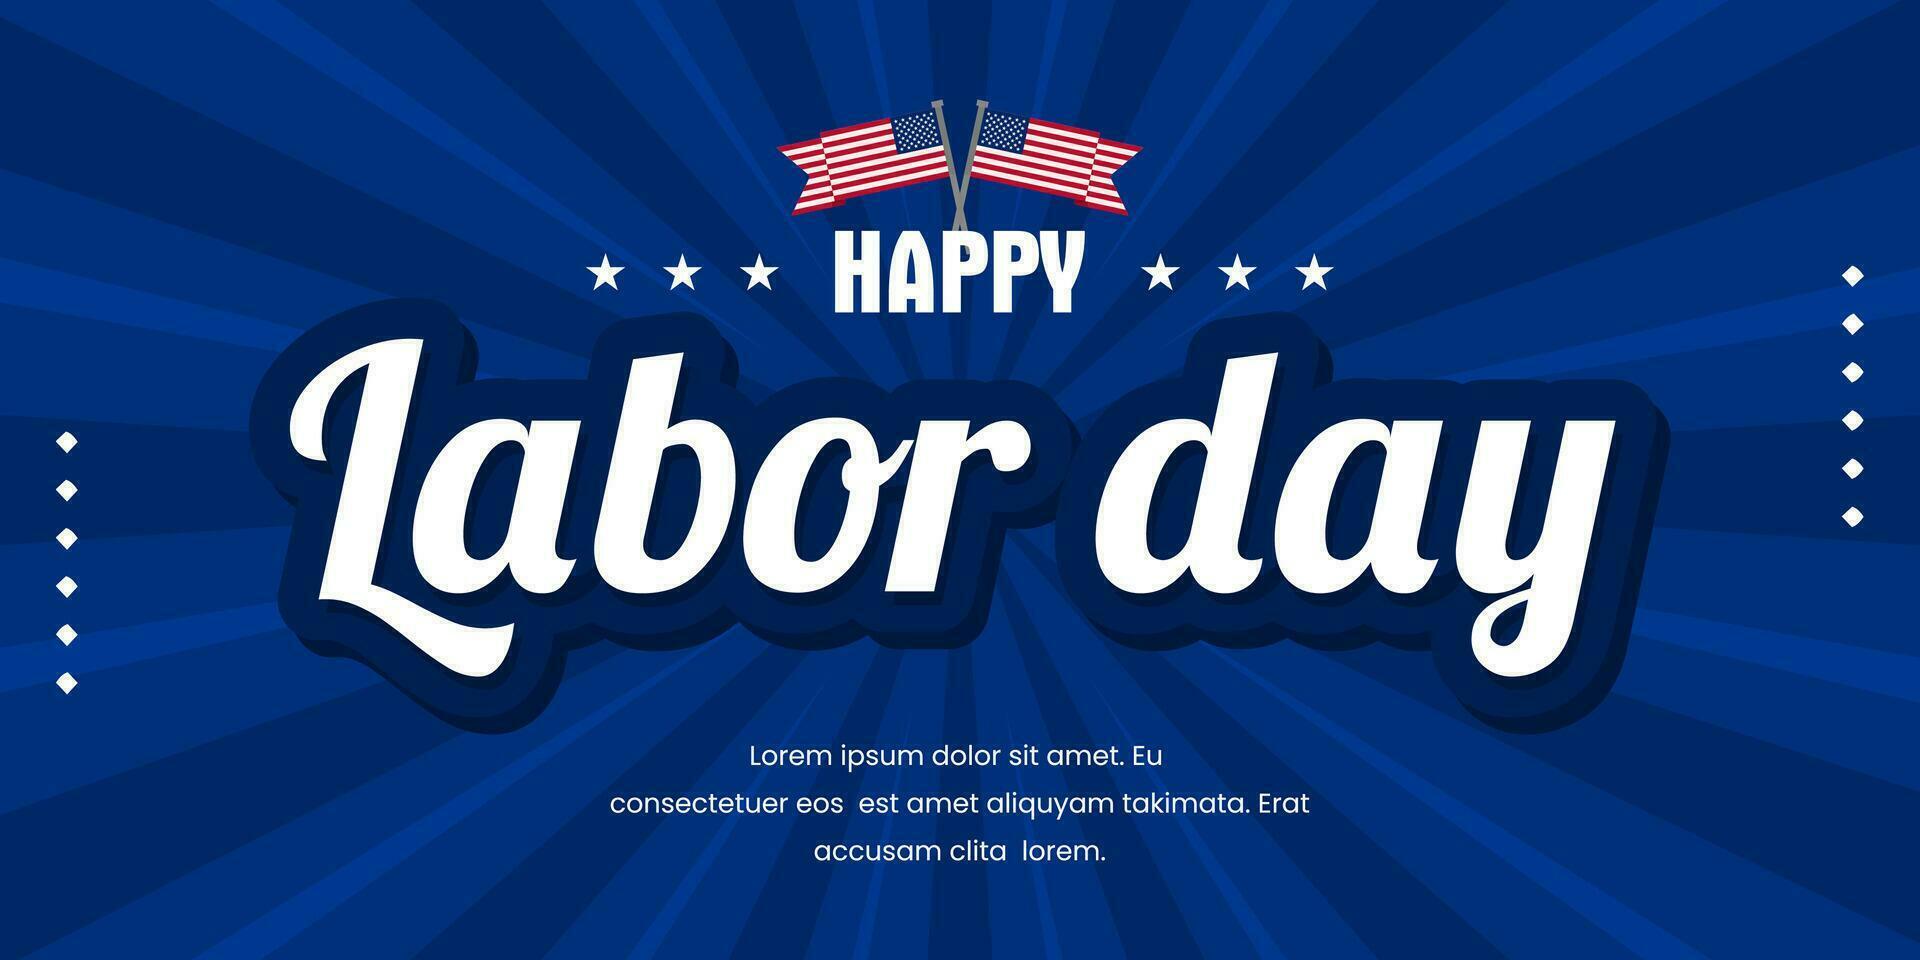 US Labor Day banner blue geometric background. american flag and text Happy Labor Day. Vector illustration.